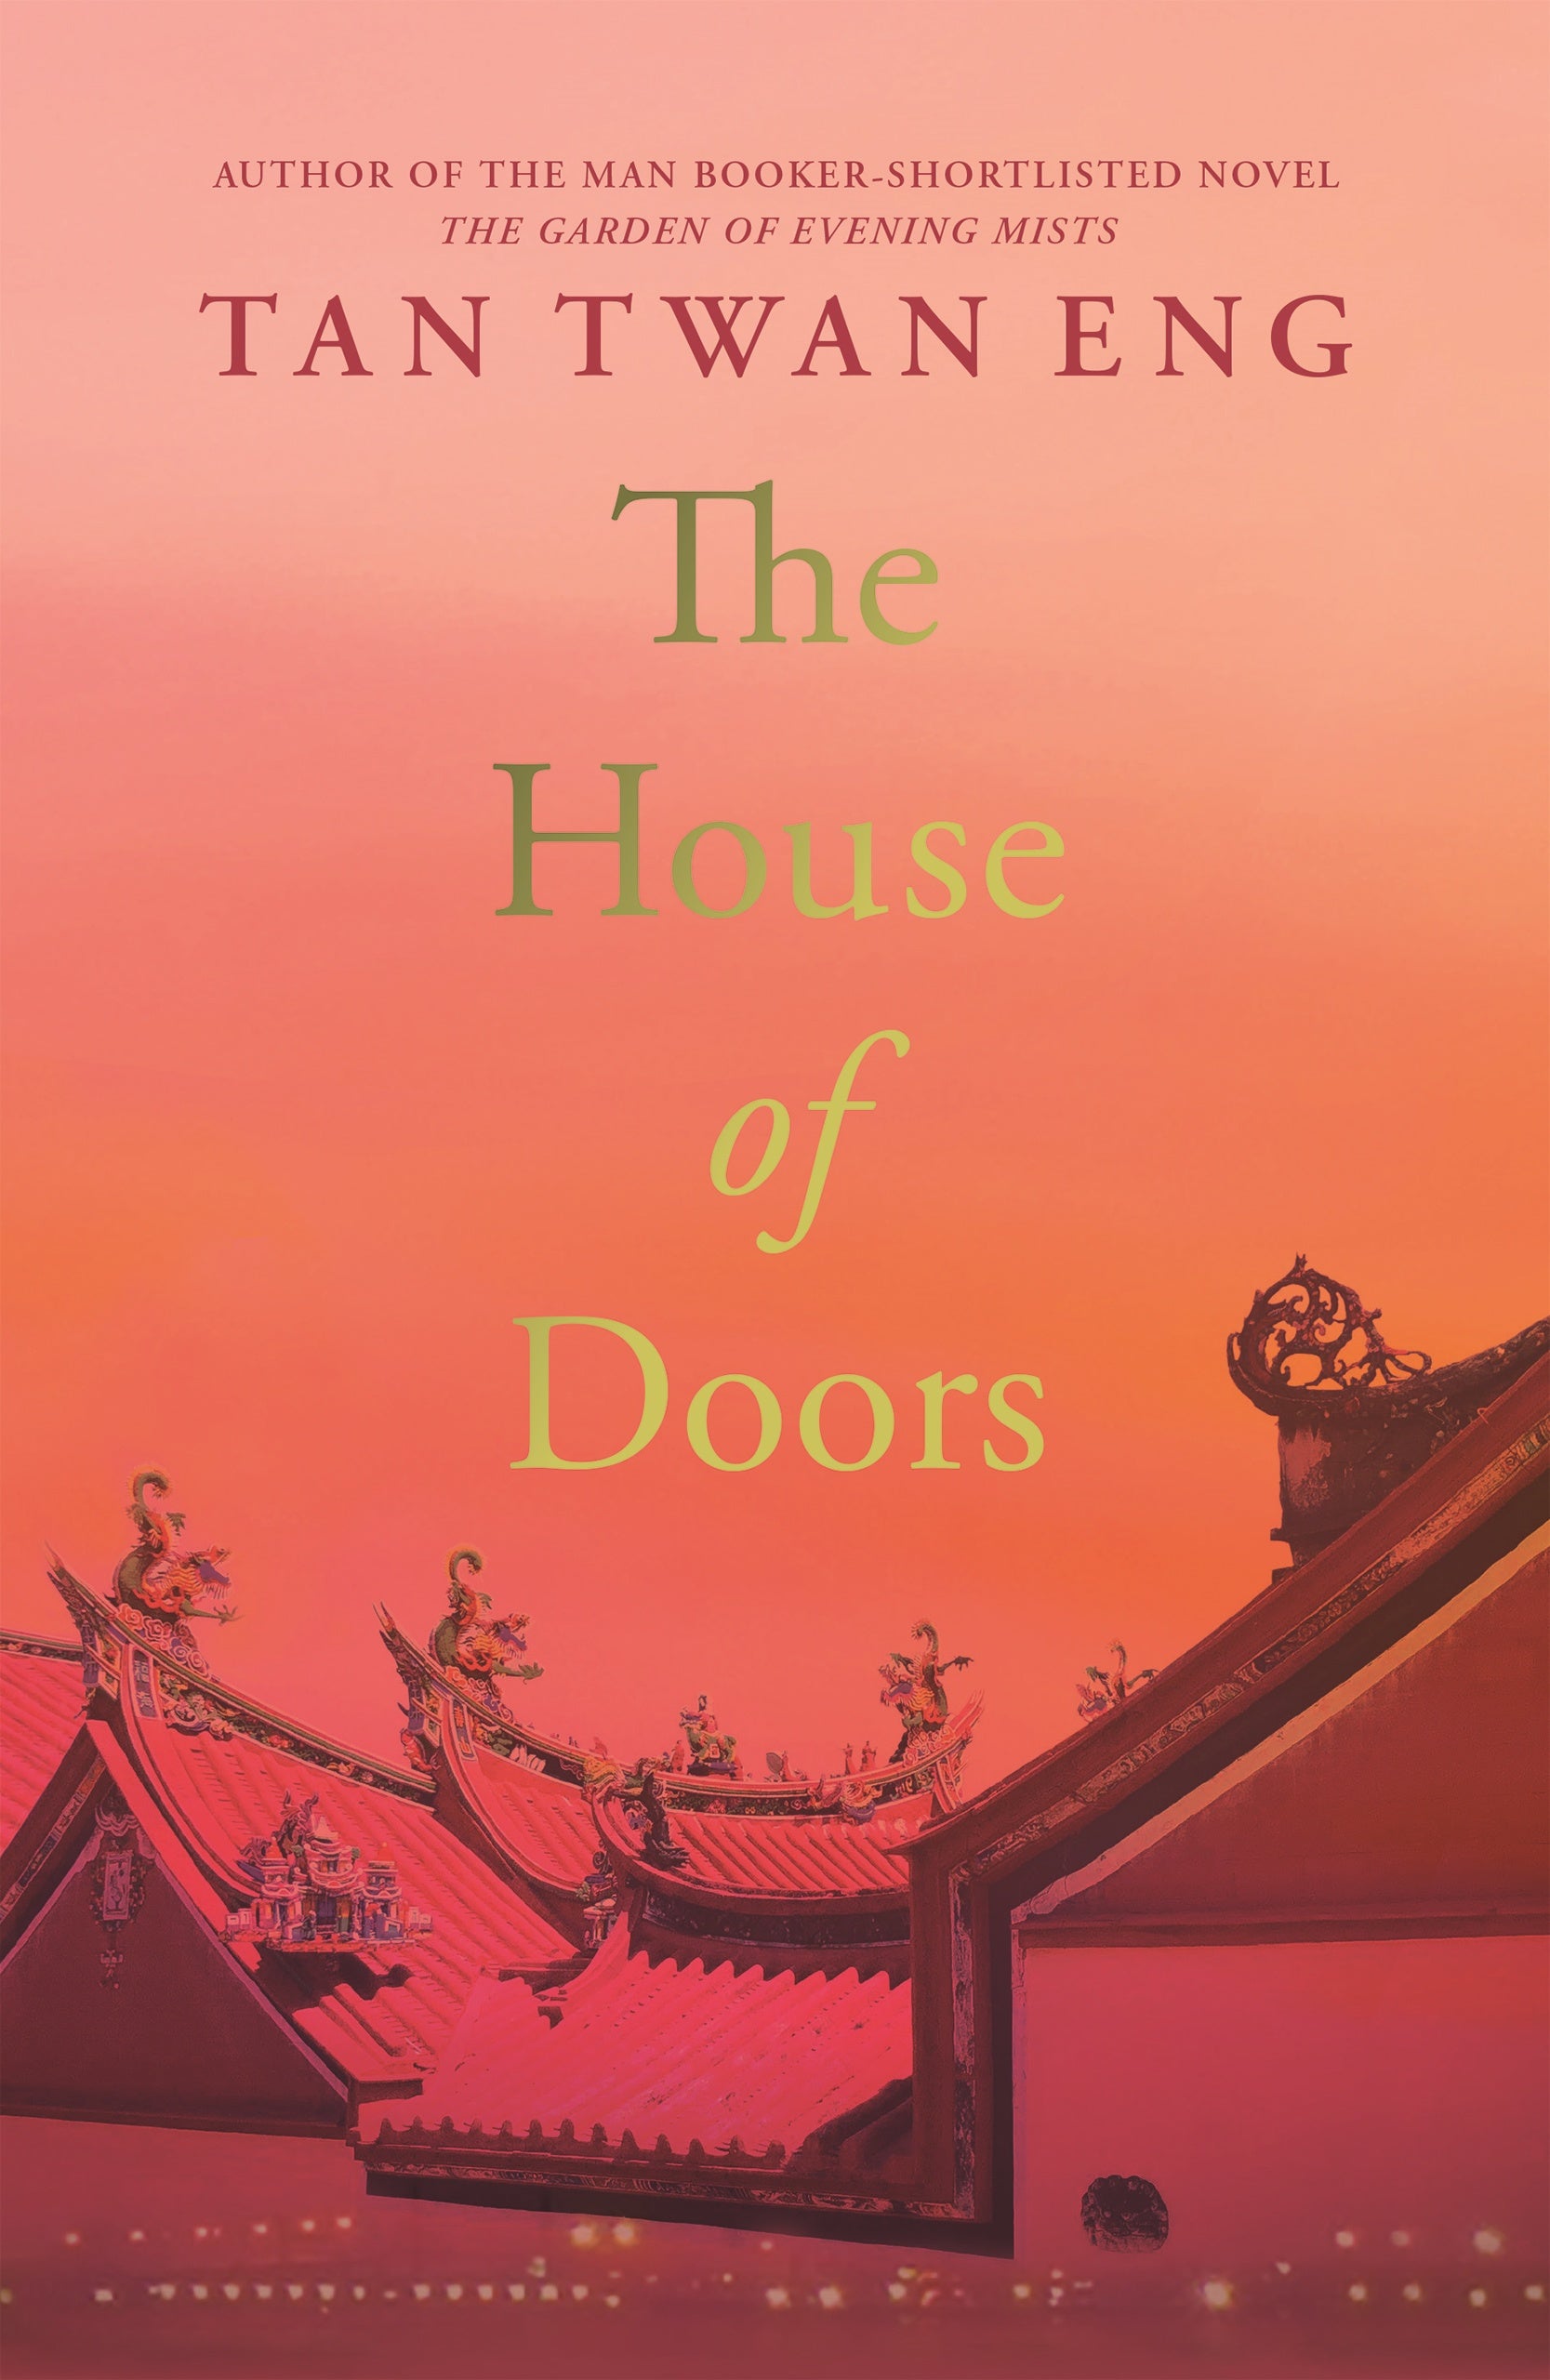 Cover of "The House of Doors" by Tan Twan Eng